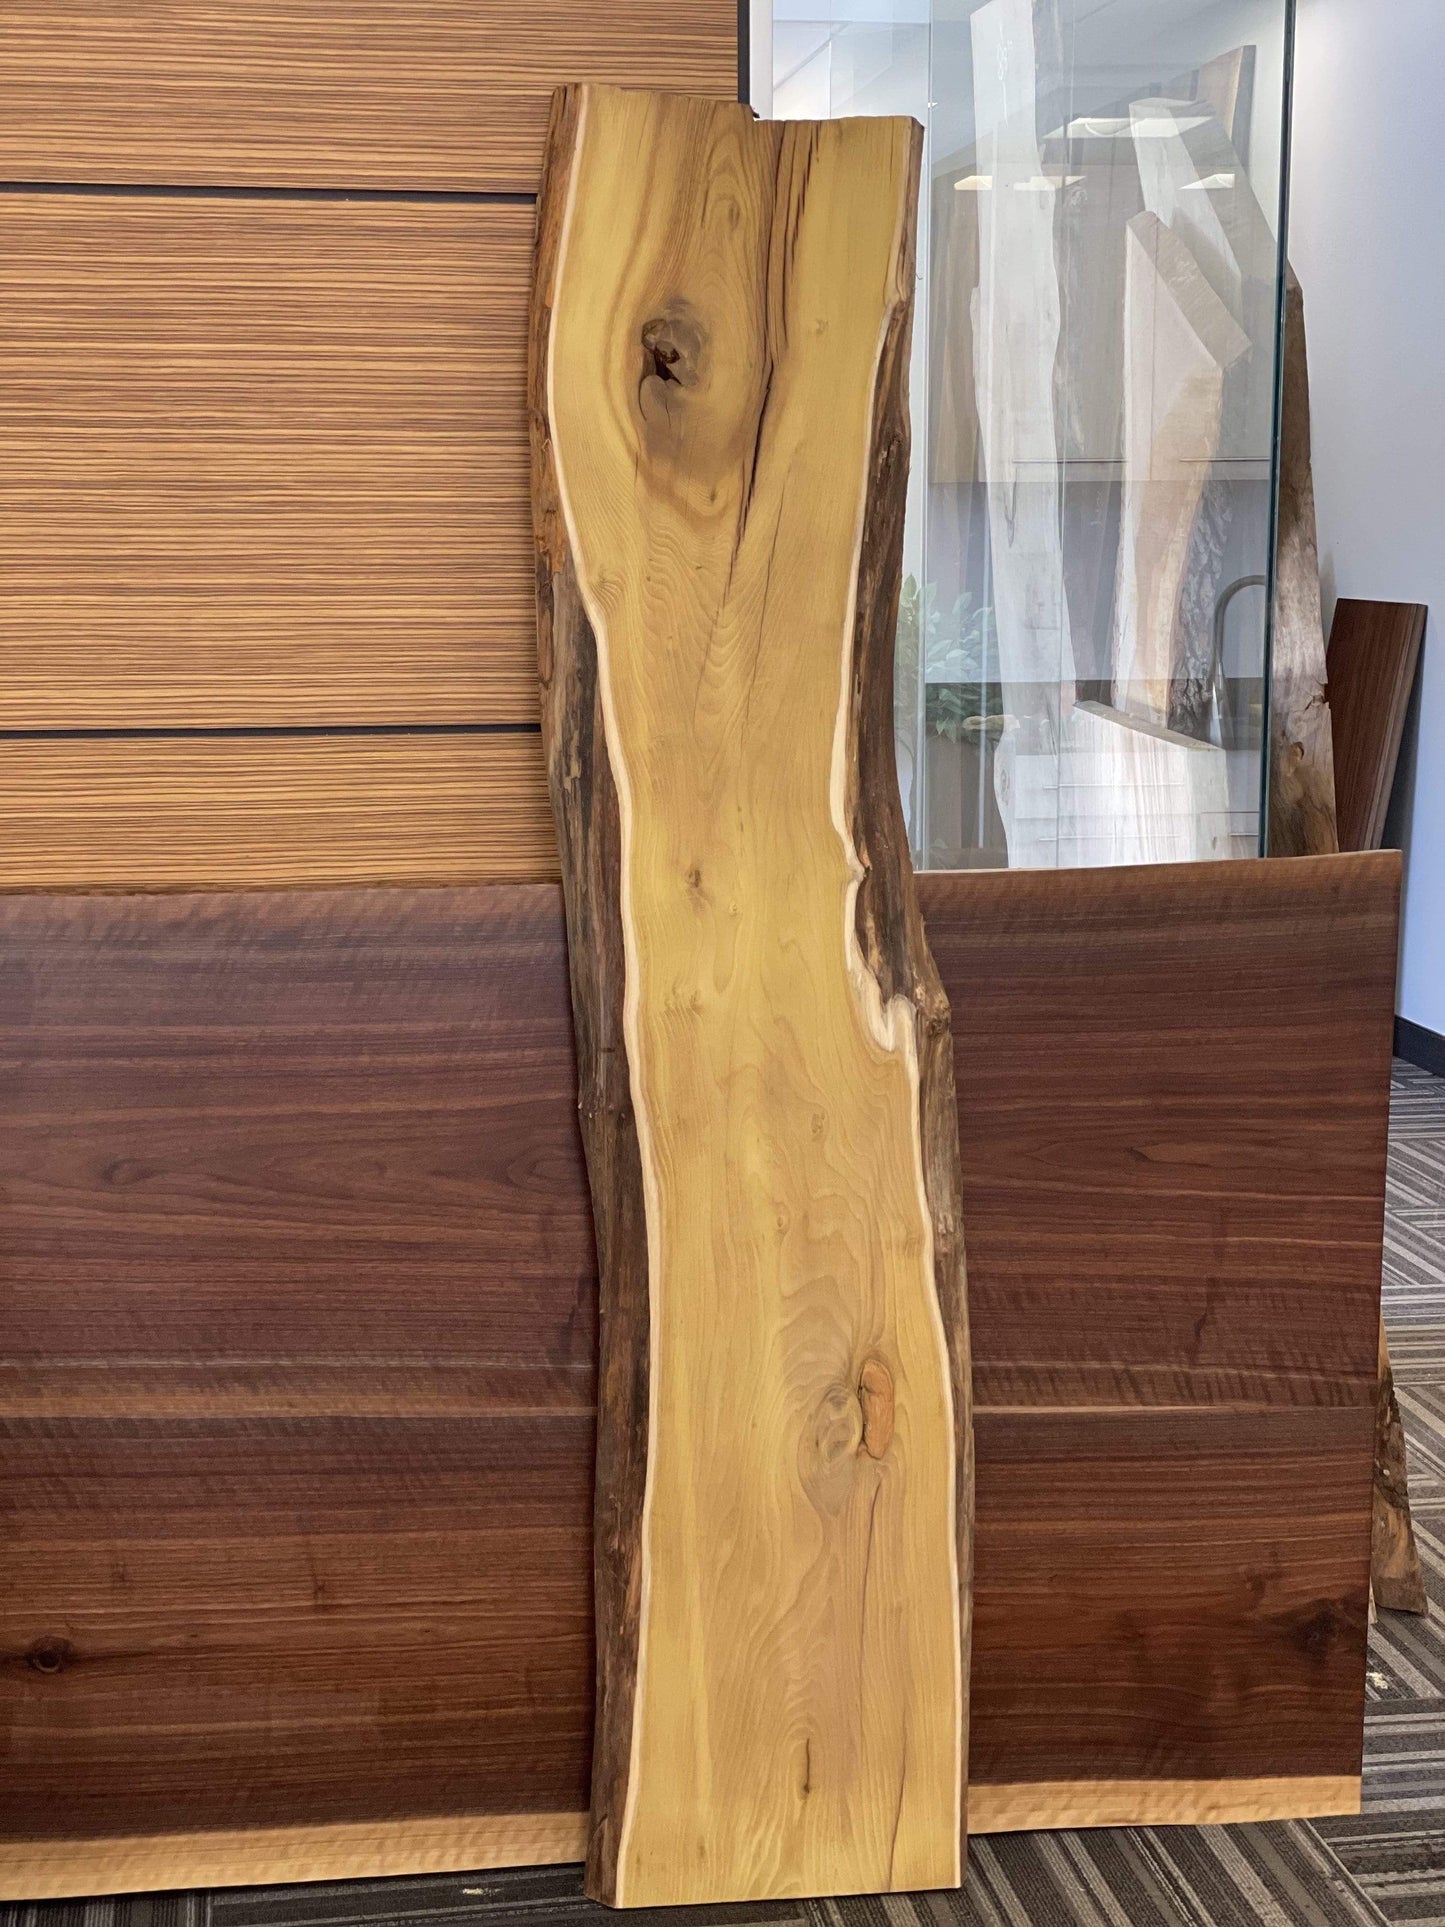 The Carpenty Shop Co., LLC Buy as is 44" Spalted Maple Slab